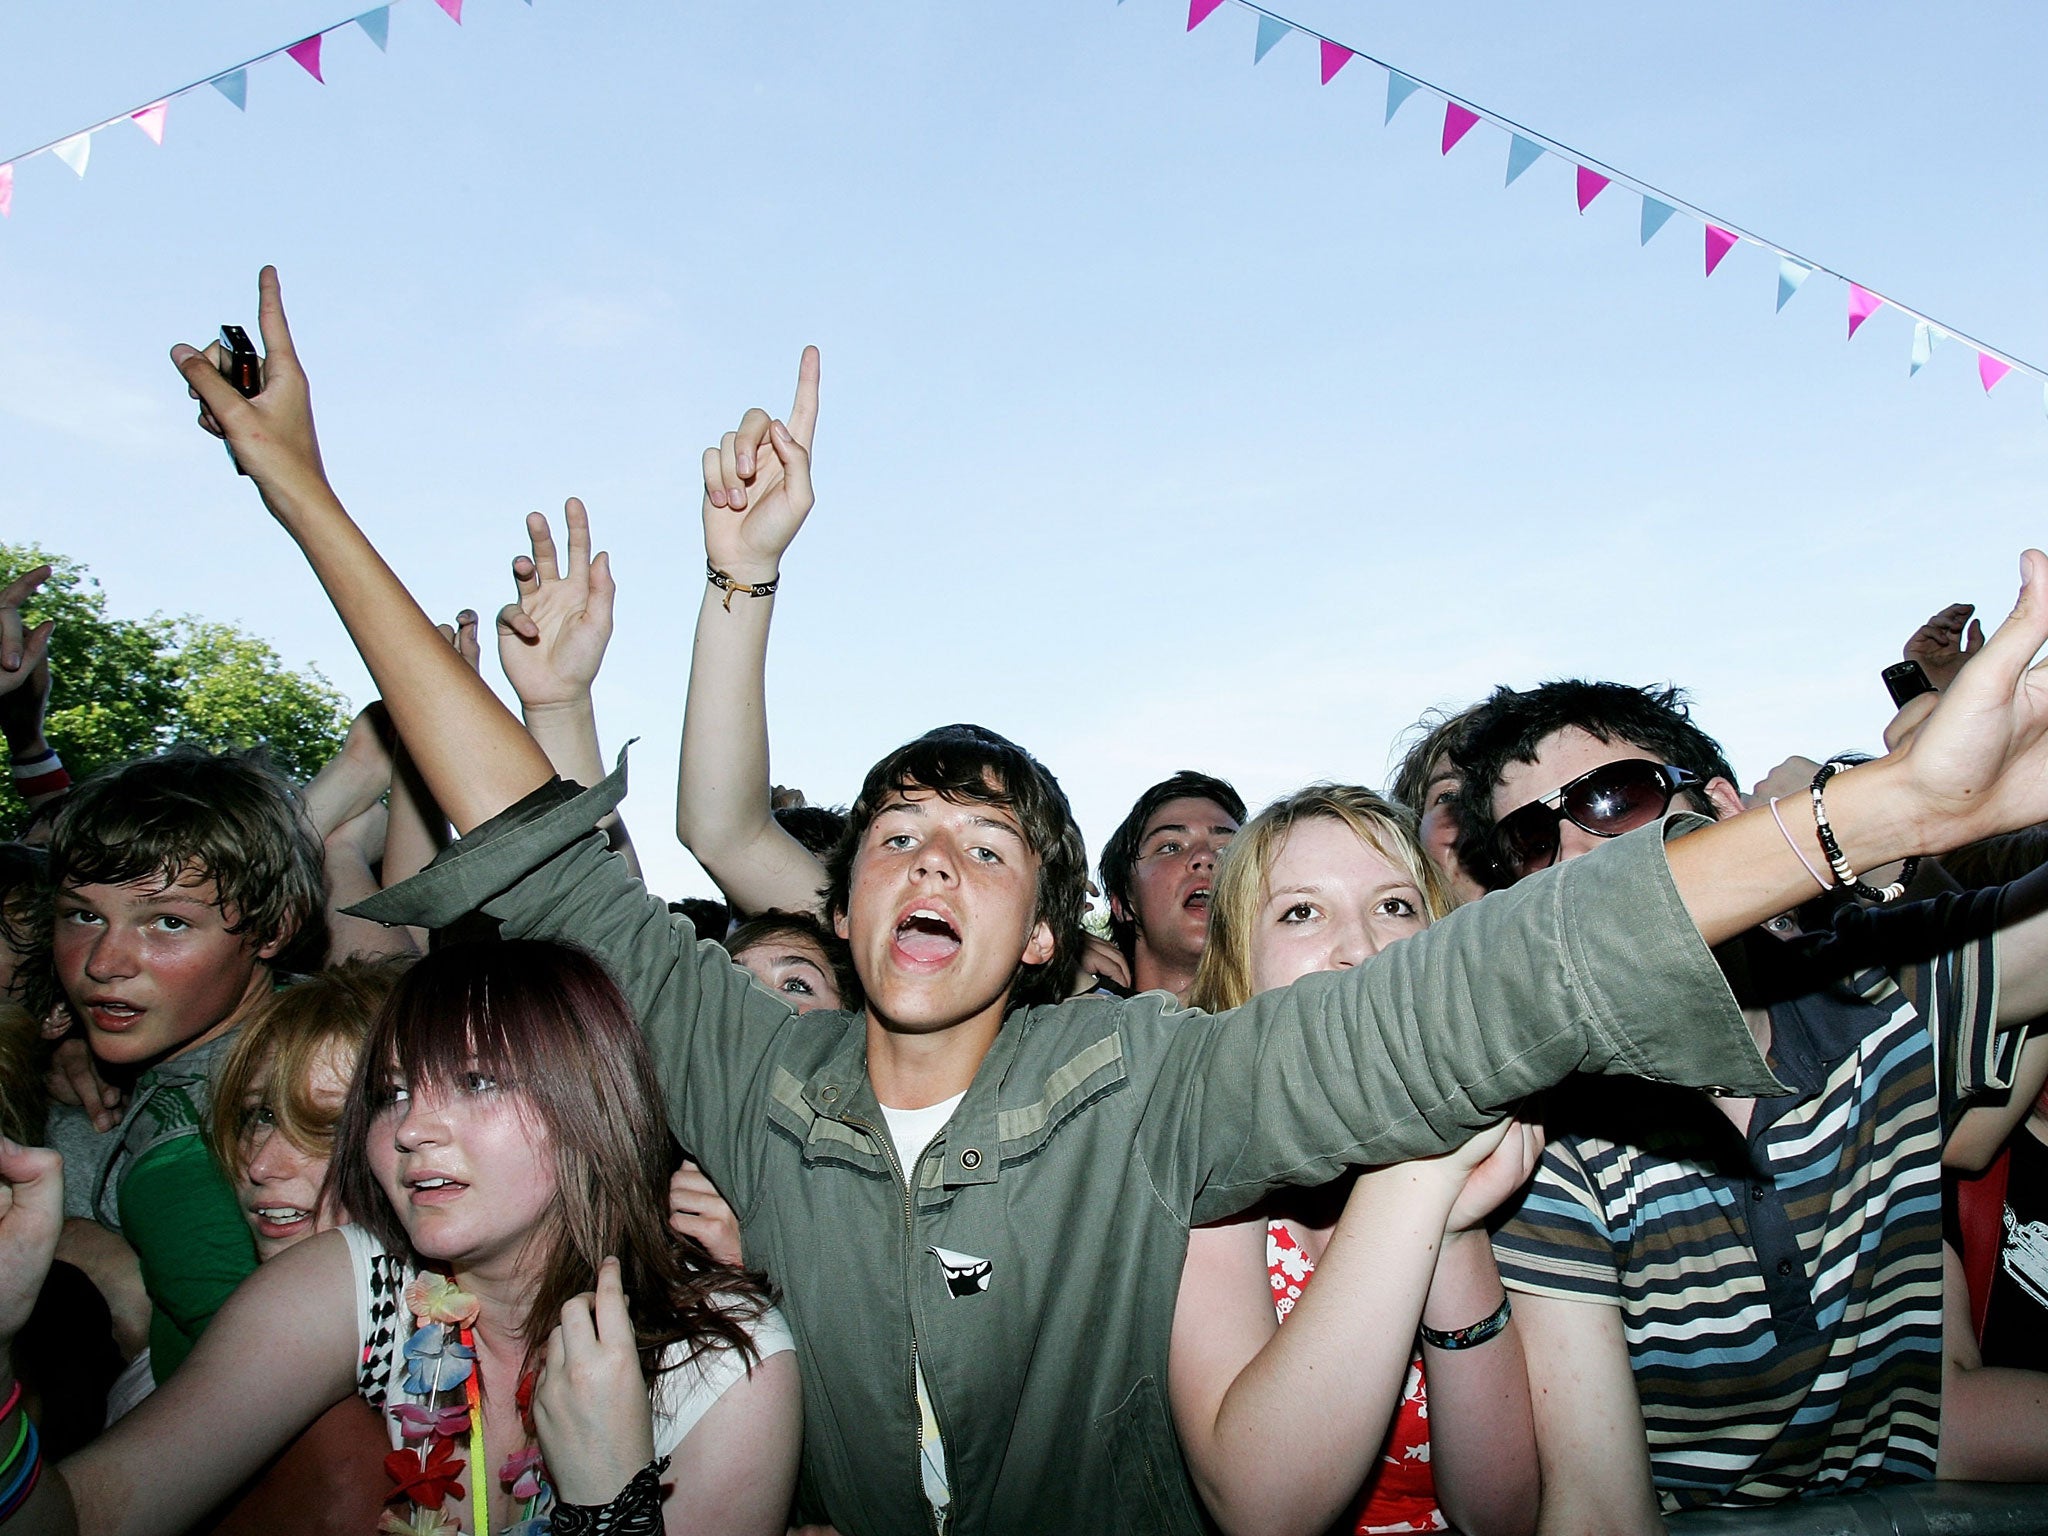 Festival-goers watch the BBC Radio One/Undersage Stage at 'Underage', a festival for under 18-year-olds, at Victoria Park on August 10, 2007 in London, England.